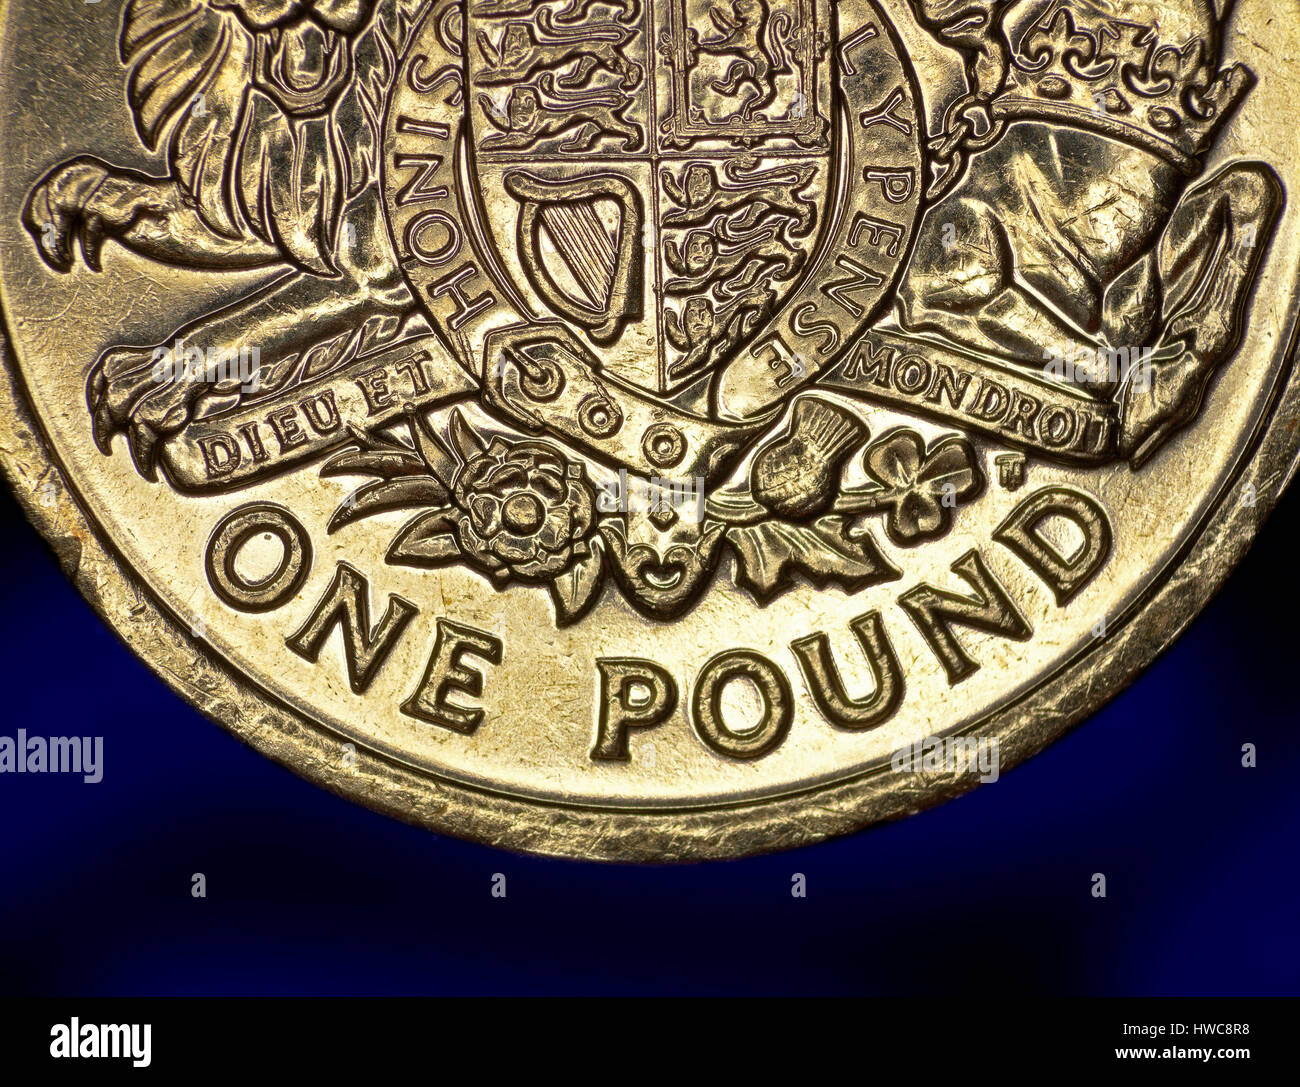 One pound coin showing stamped detail Stock Photo